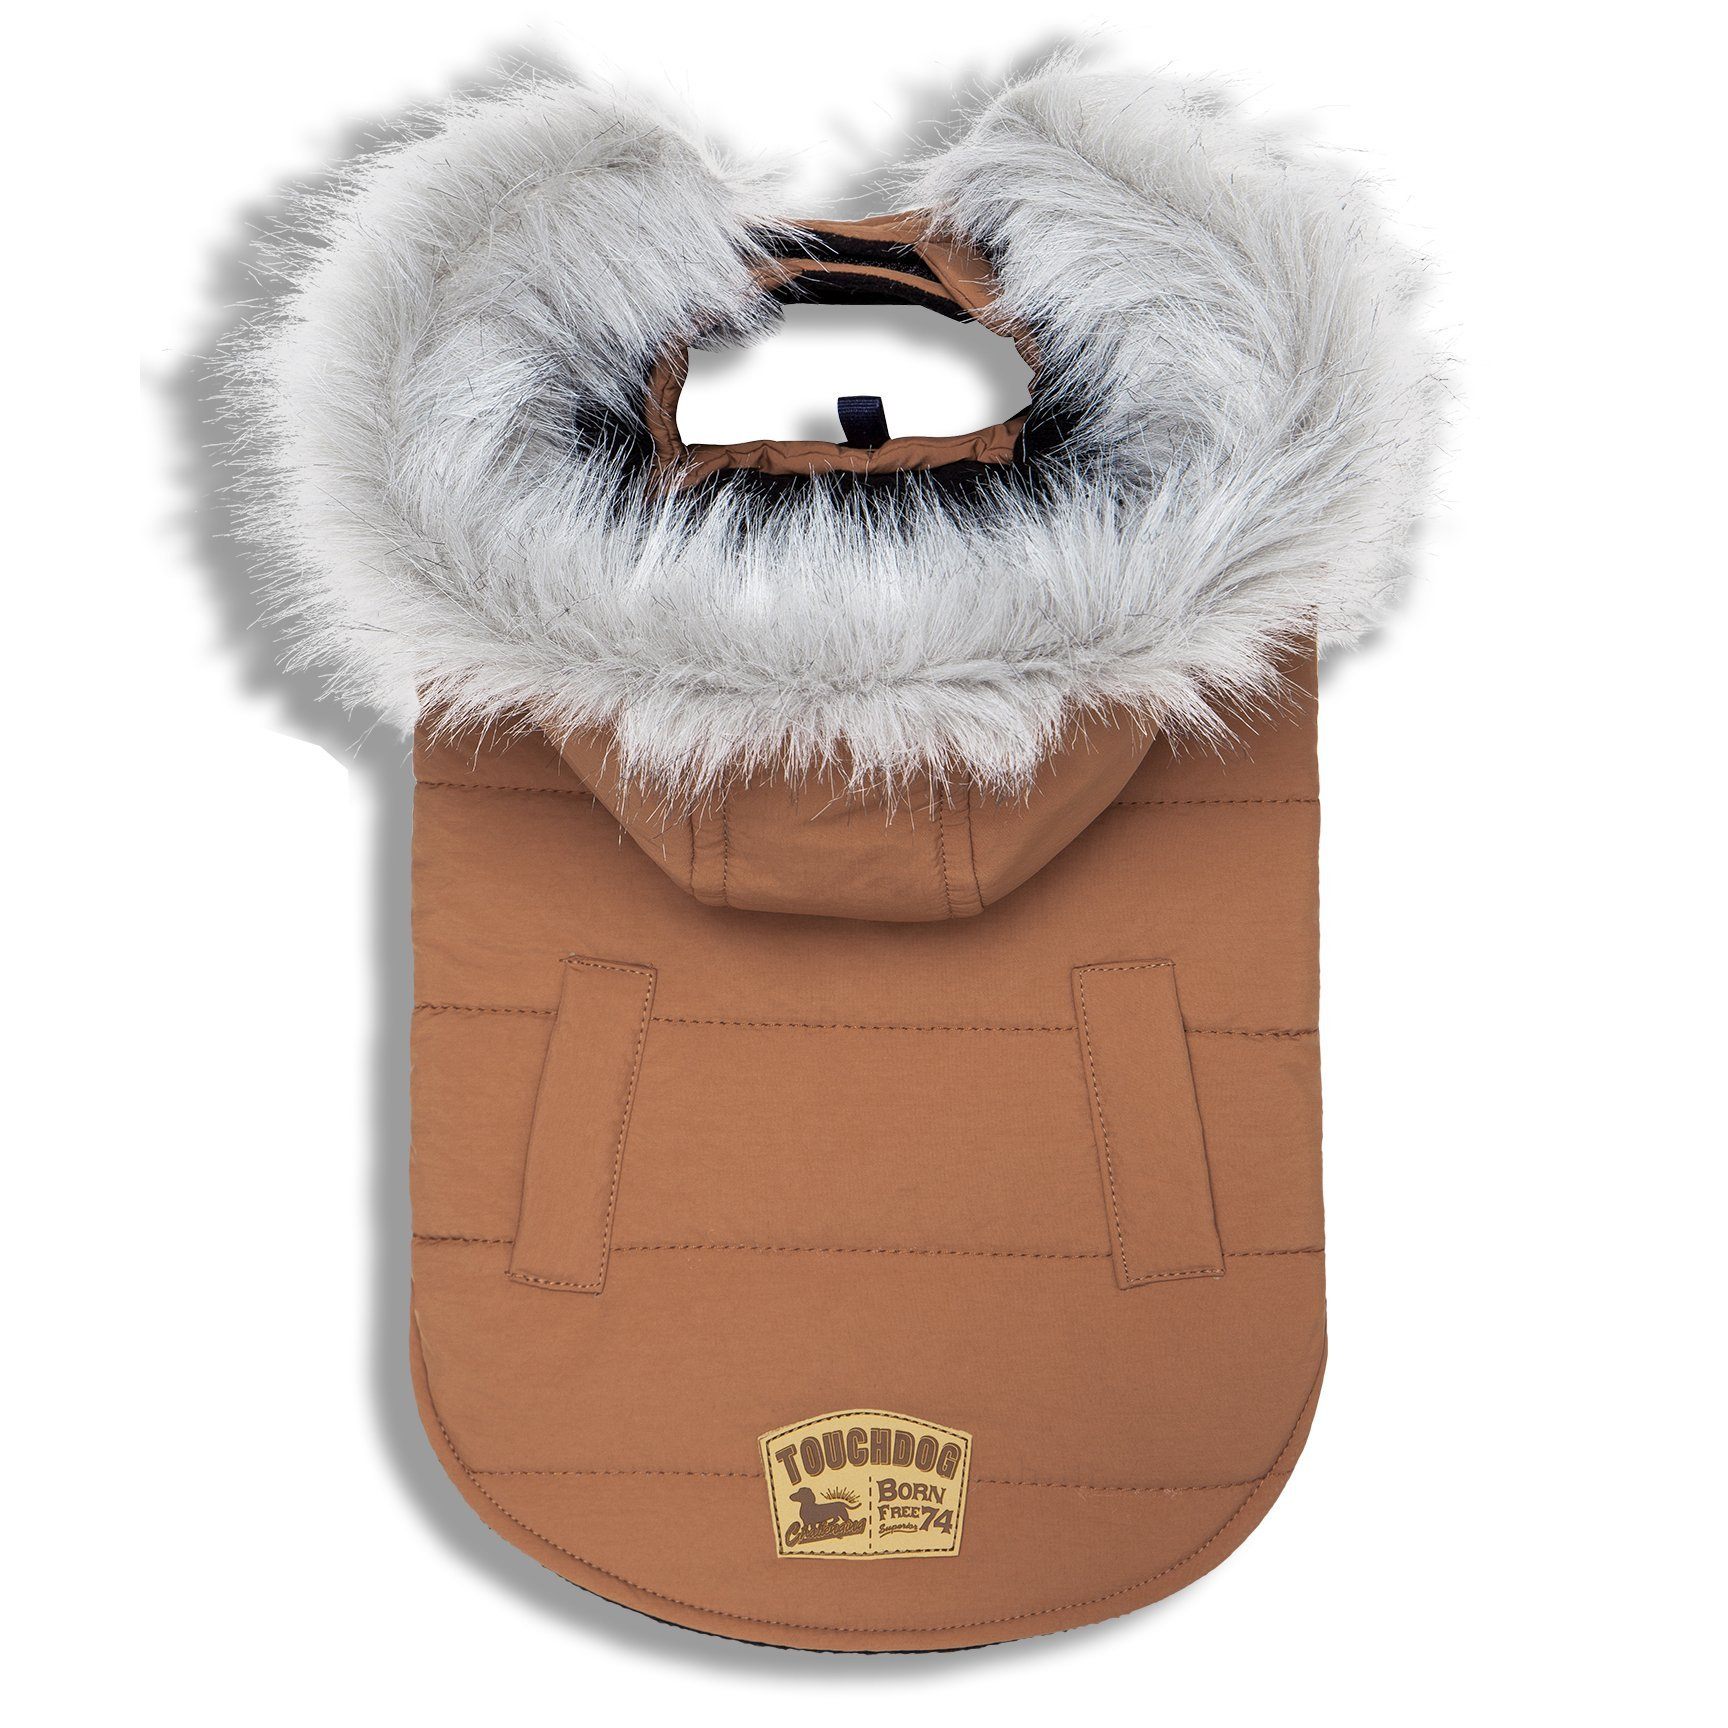 Touchdog 'Eskimo-Swag' Duck-Down Insulated Winter Dog Coat Parka X-Small Brown